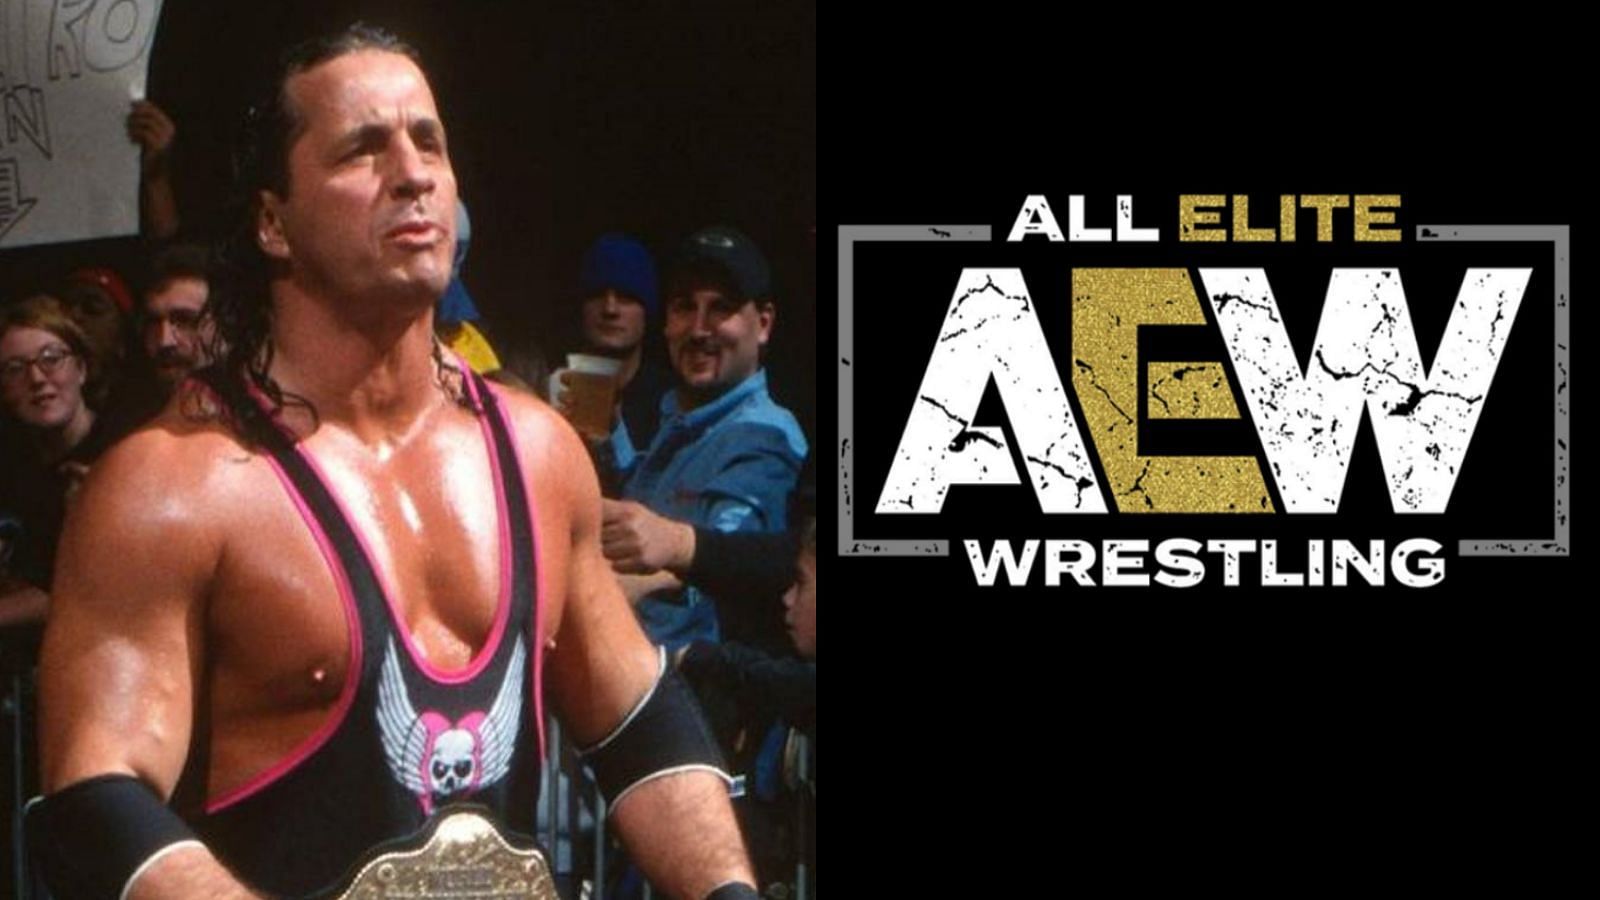 The Hitman has been quite involved with AEW stars lately.